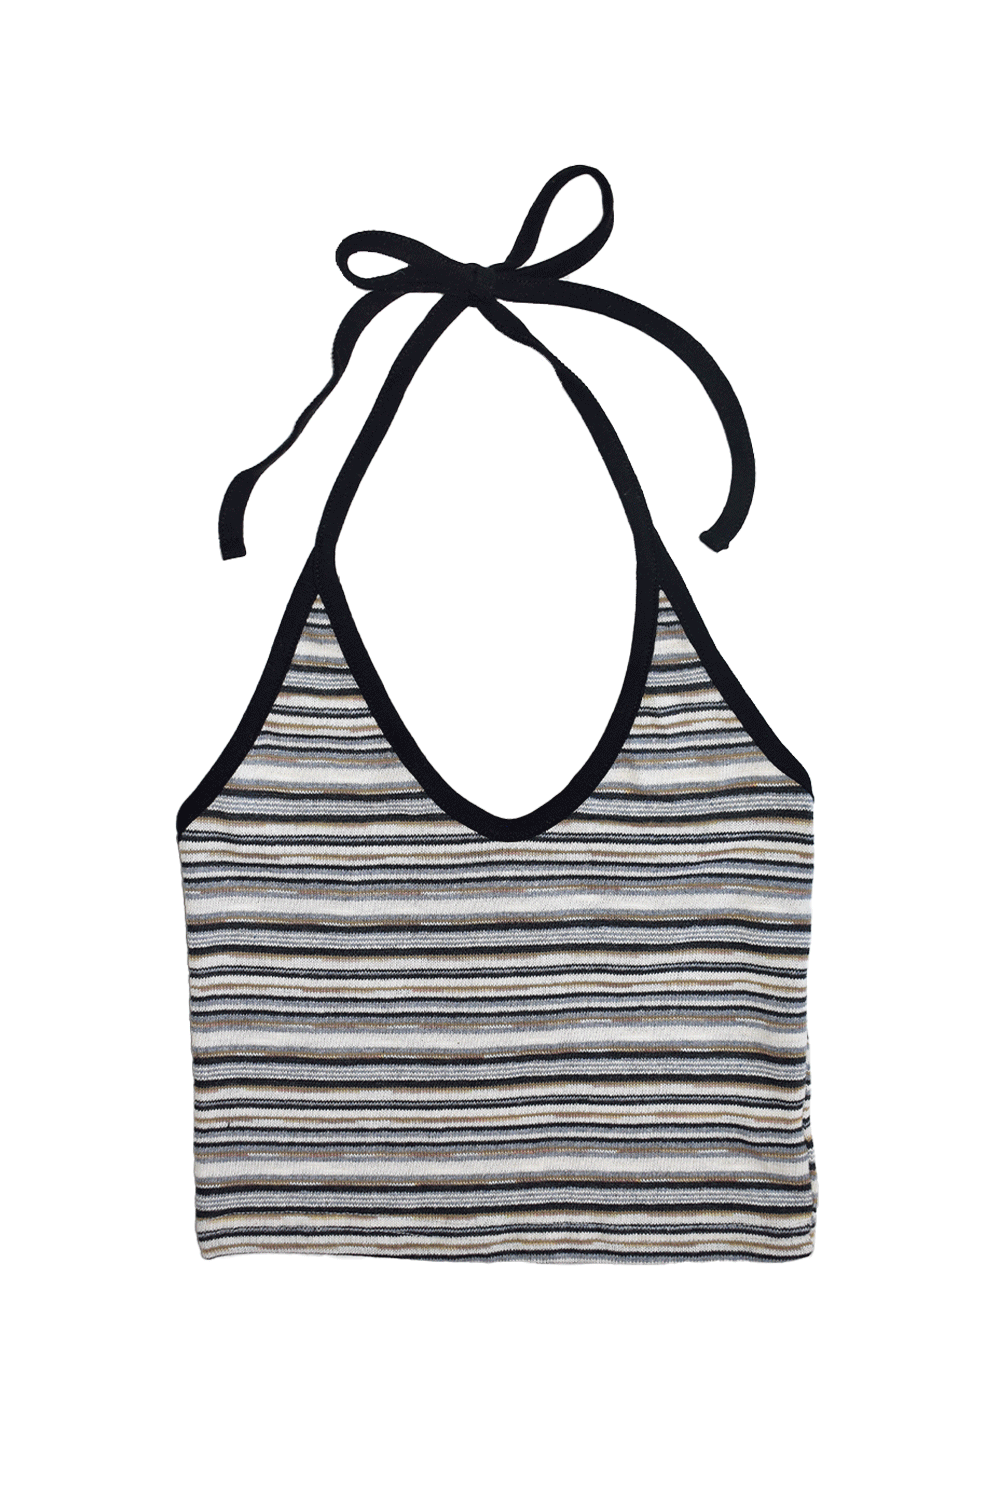 sunny halter top (3colors)